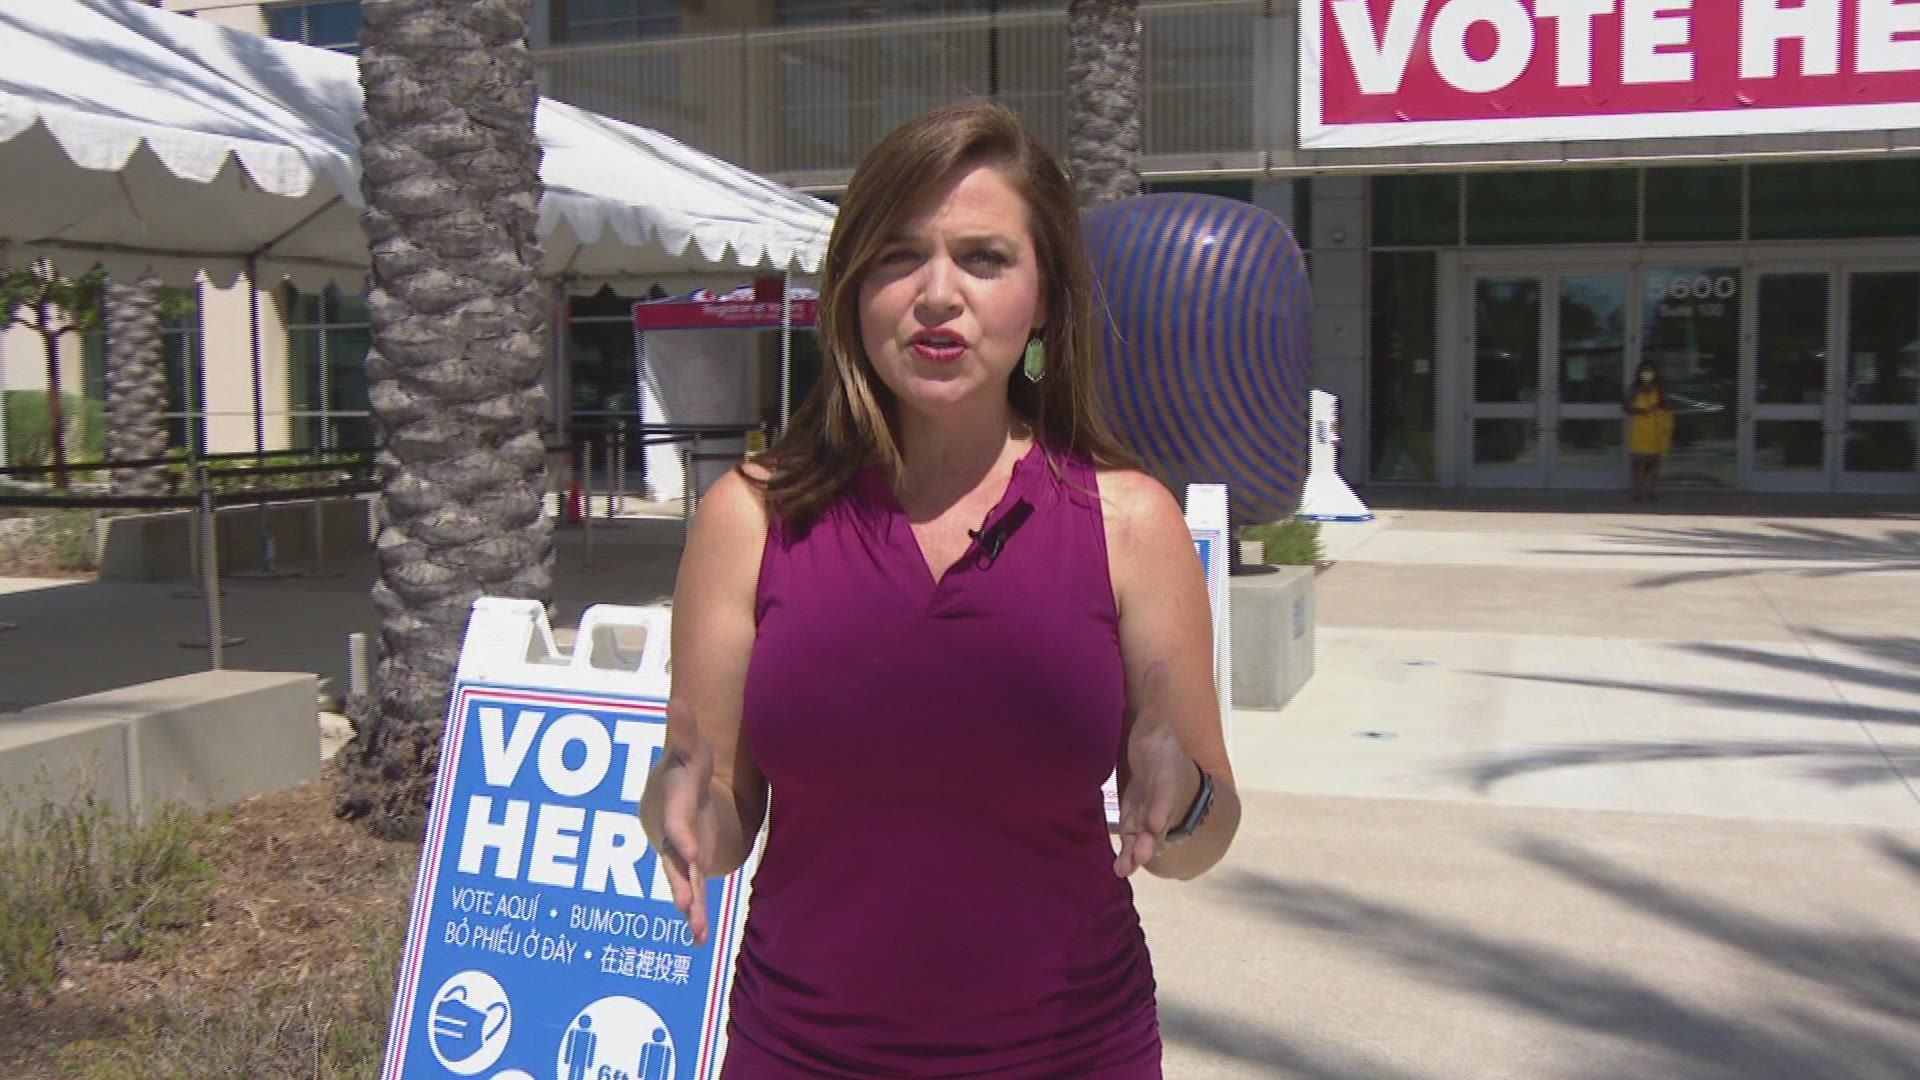 For the first time, there are no assigned polling locations for in-person voters in San Diego County.